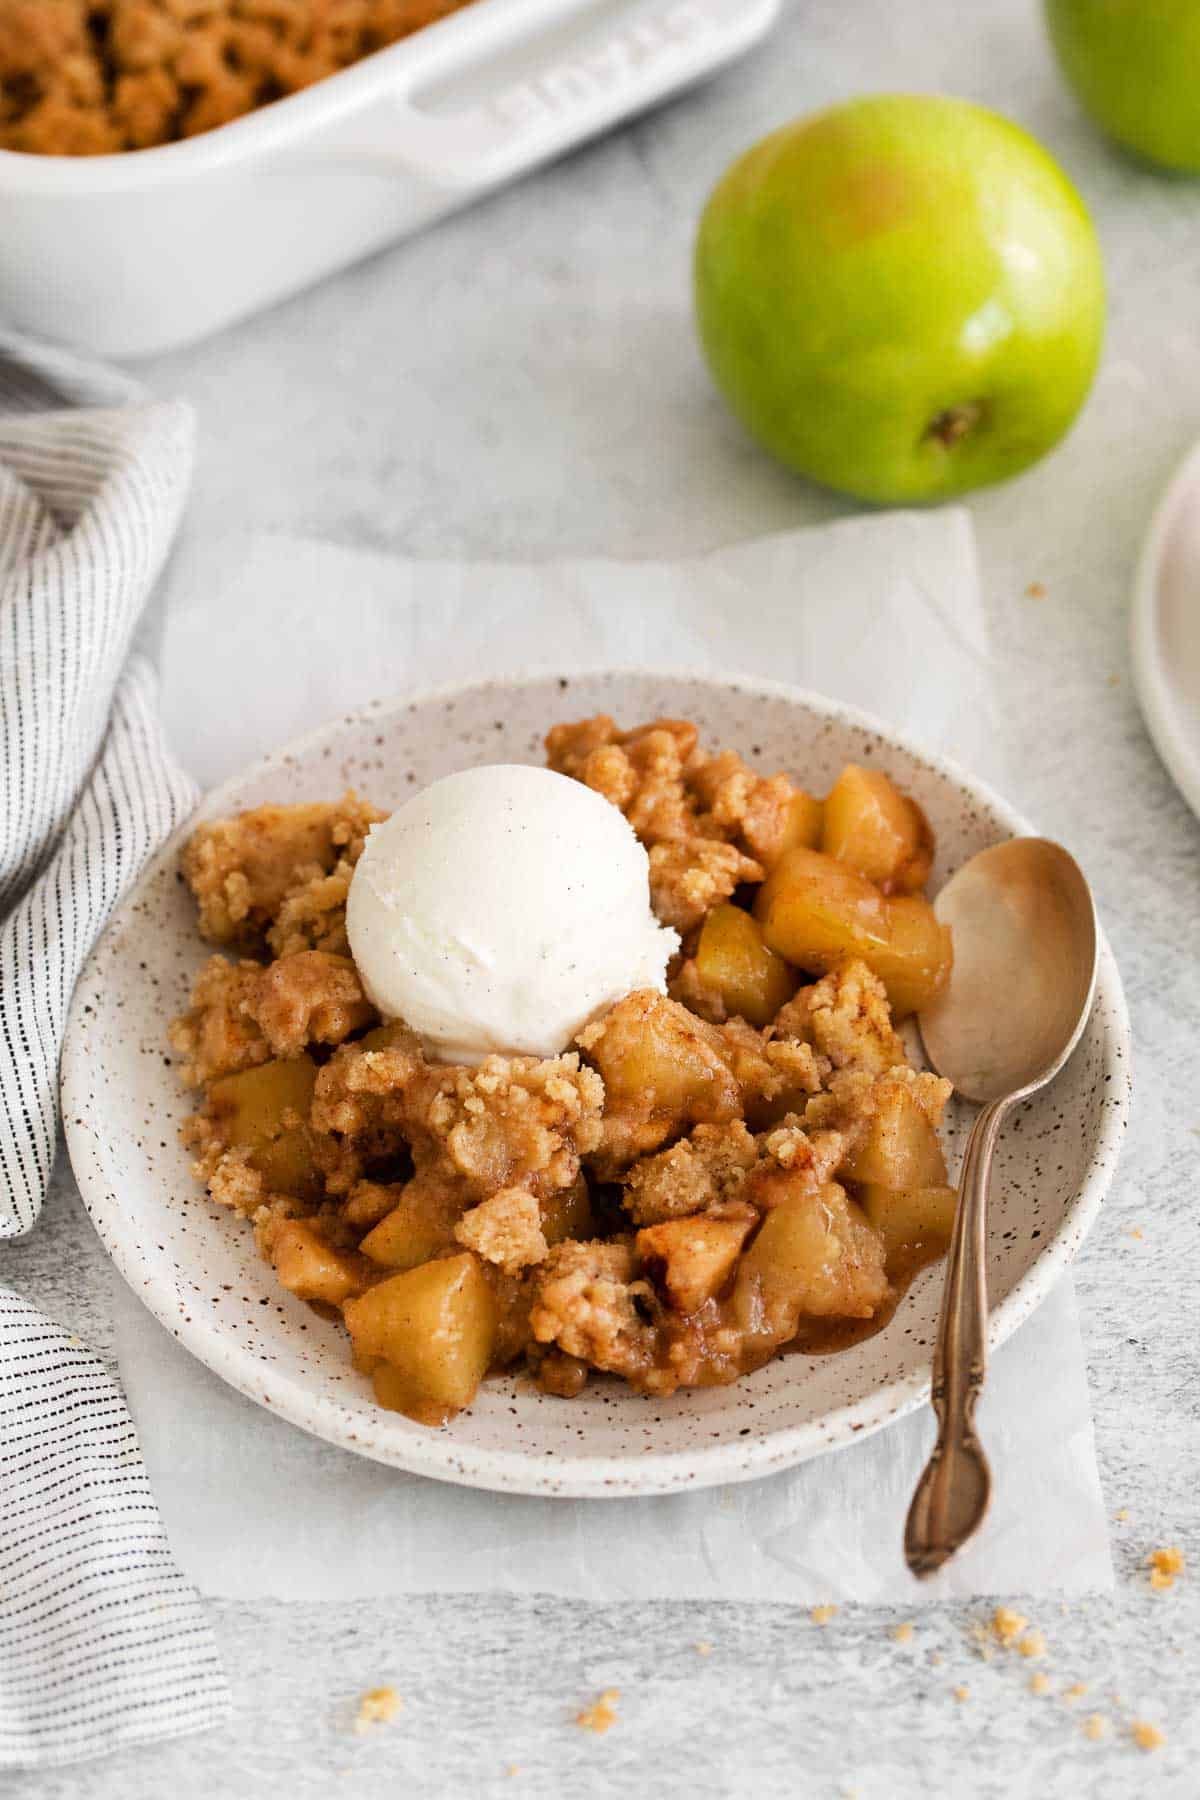 A serving of gluten-free apple crumble on a plate, with a scoop of vanilla ice cream on top and a spoon next to it